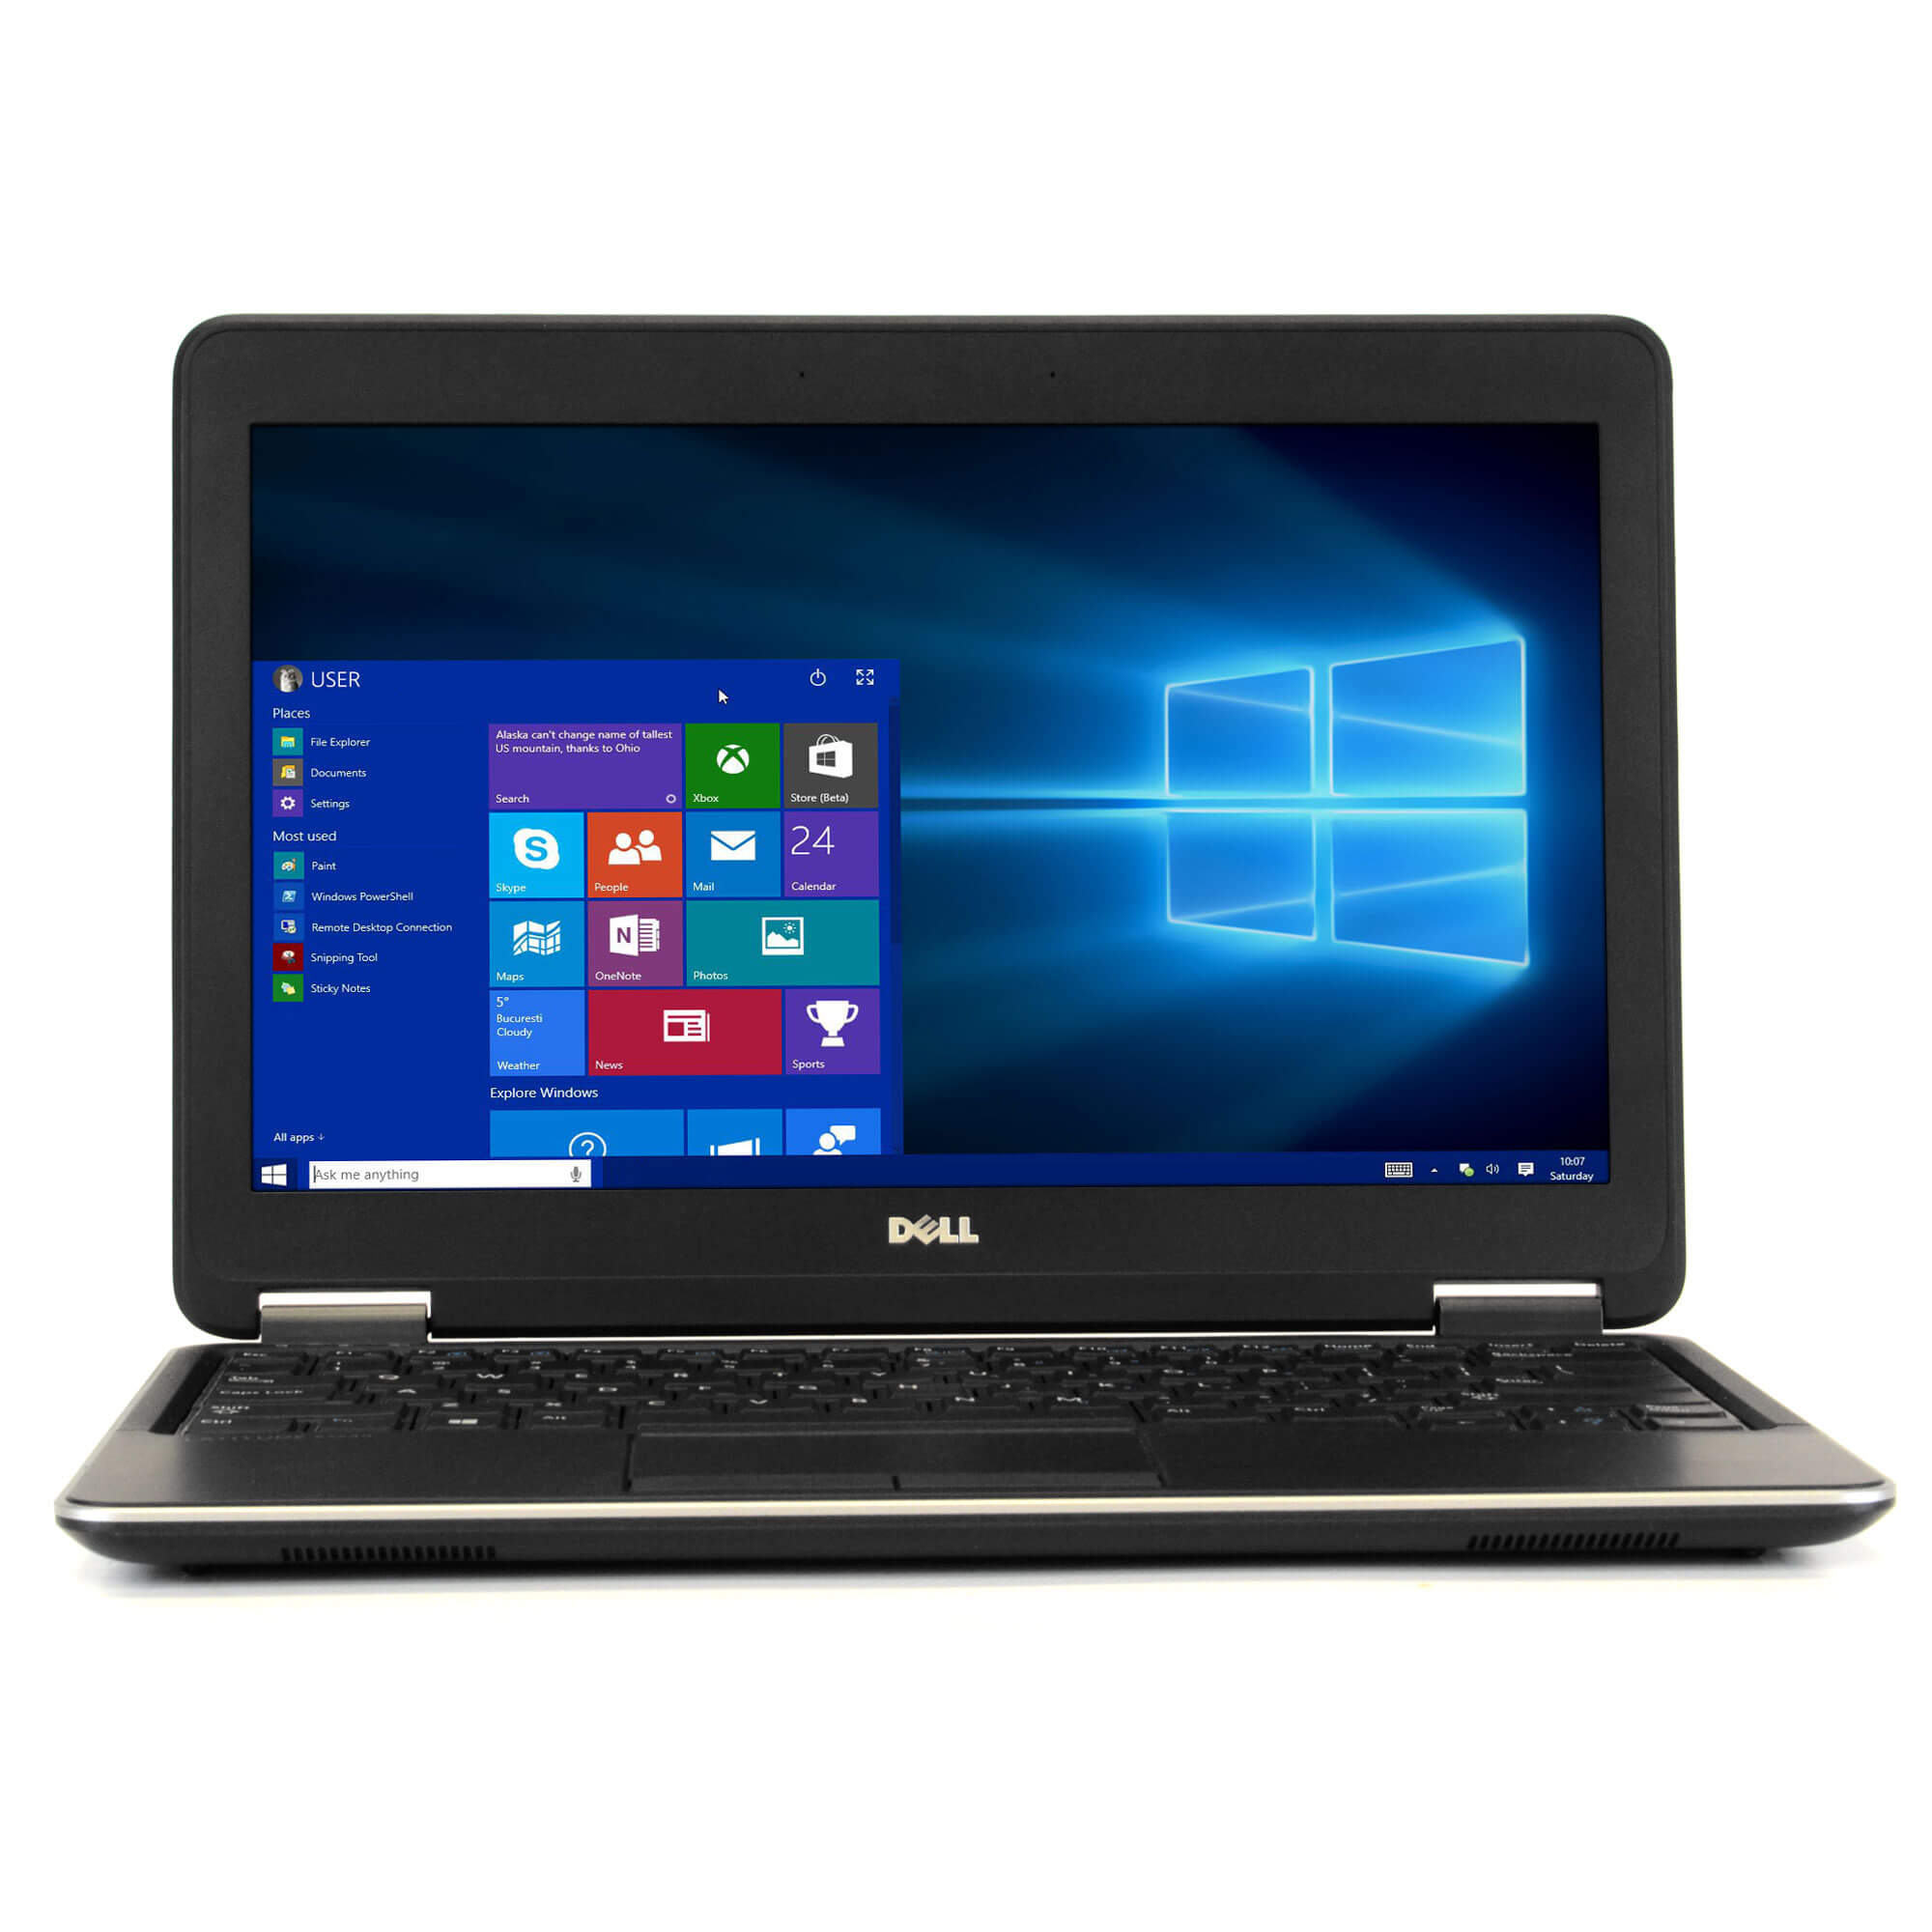 Dell Latitude E7440 Laptop Computer, 1.90 GHz Intel i5 Dual Core Gen 4, 16GB DDR3 RAM, 240GB Solid State Drive (SSD) SSD Hard Drive, Windows 10 Home 64 Bit, 14" Screen Refurbished - image 1 of 9